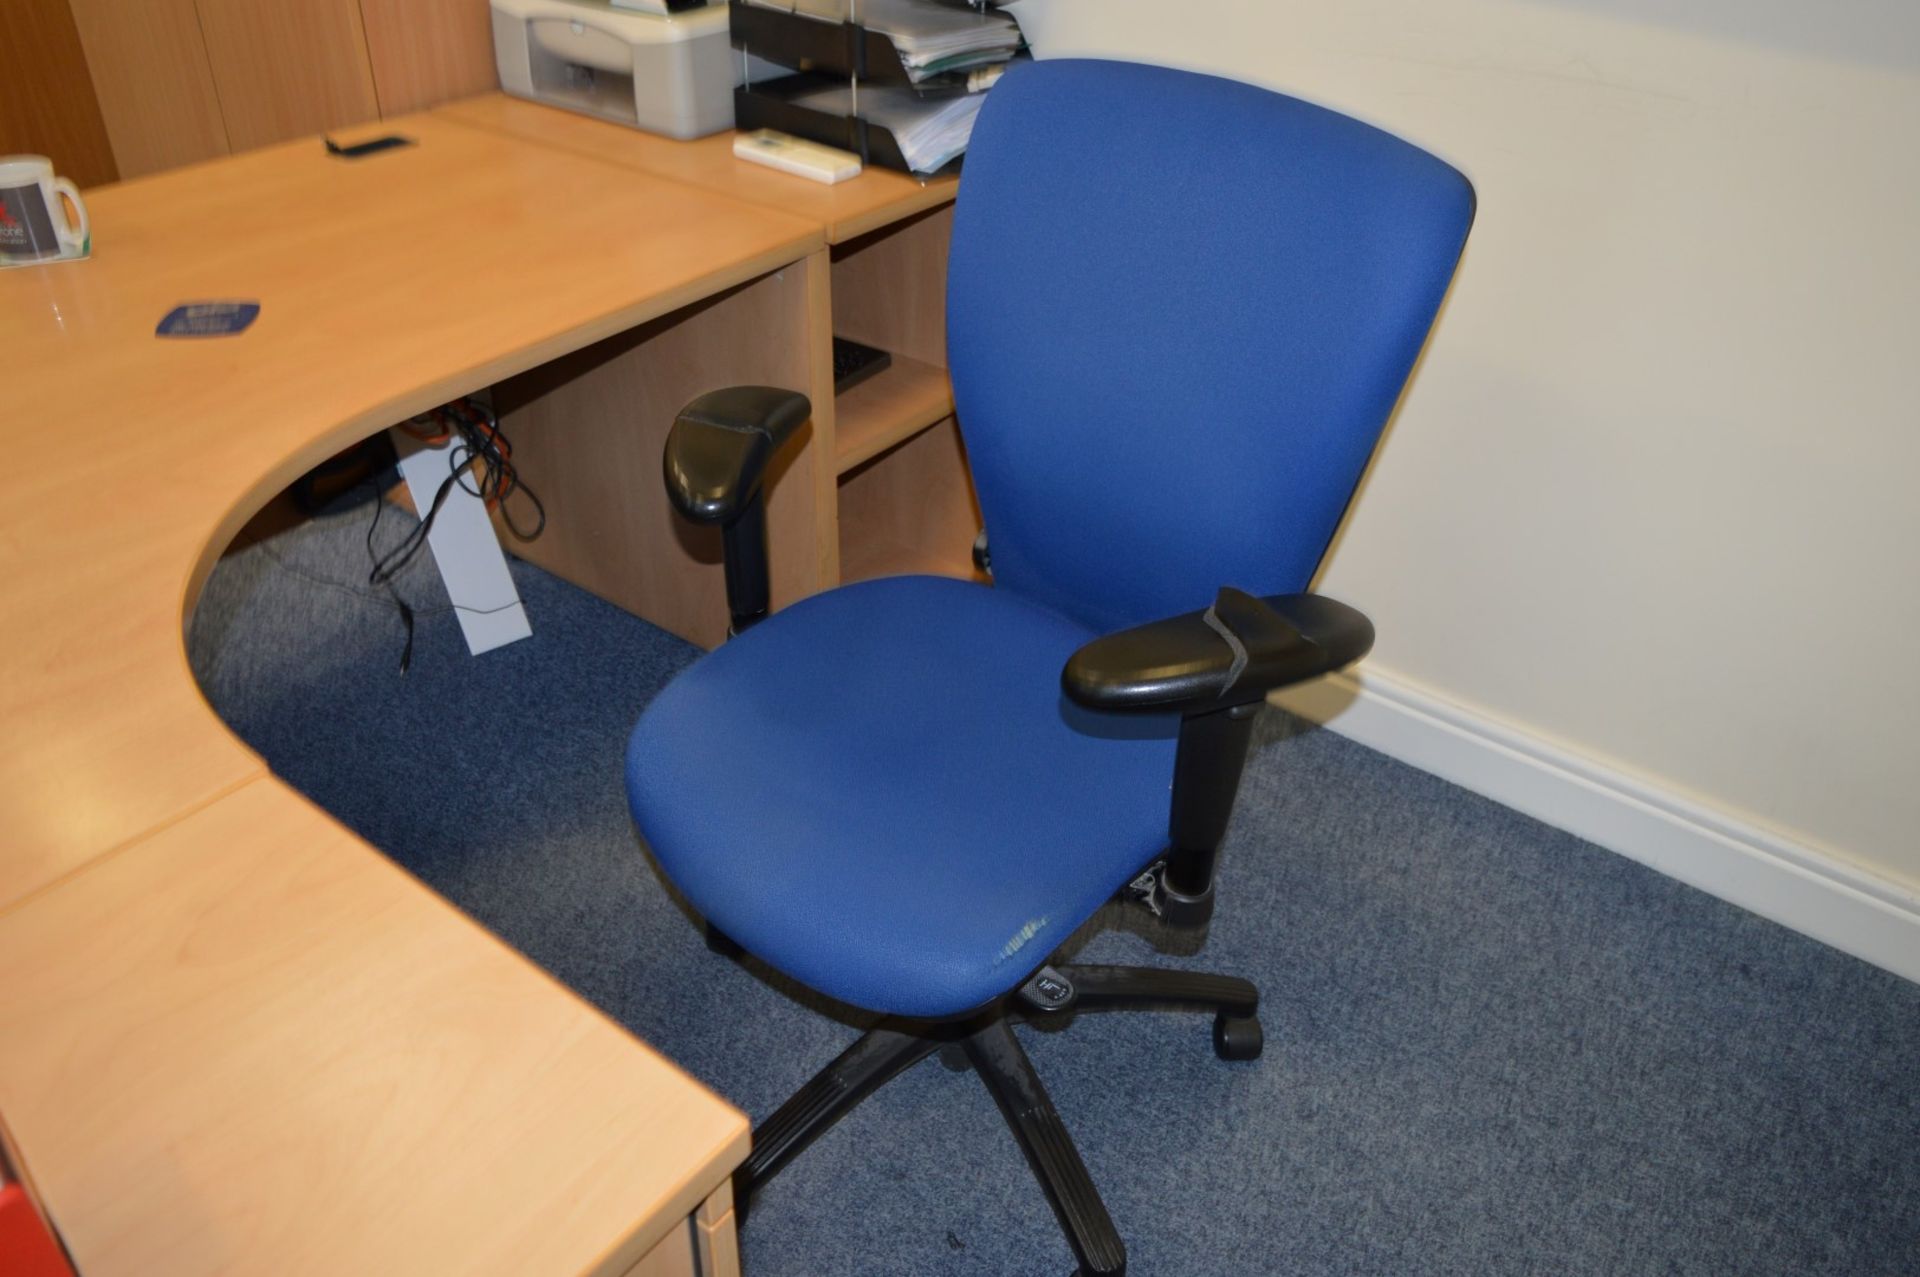 1 x Office Furniture Set Including Office Desk, Swivel Chair and Two Pedestal Units - Beech Finish - - Image 3 of 6